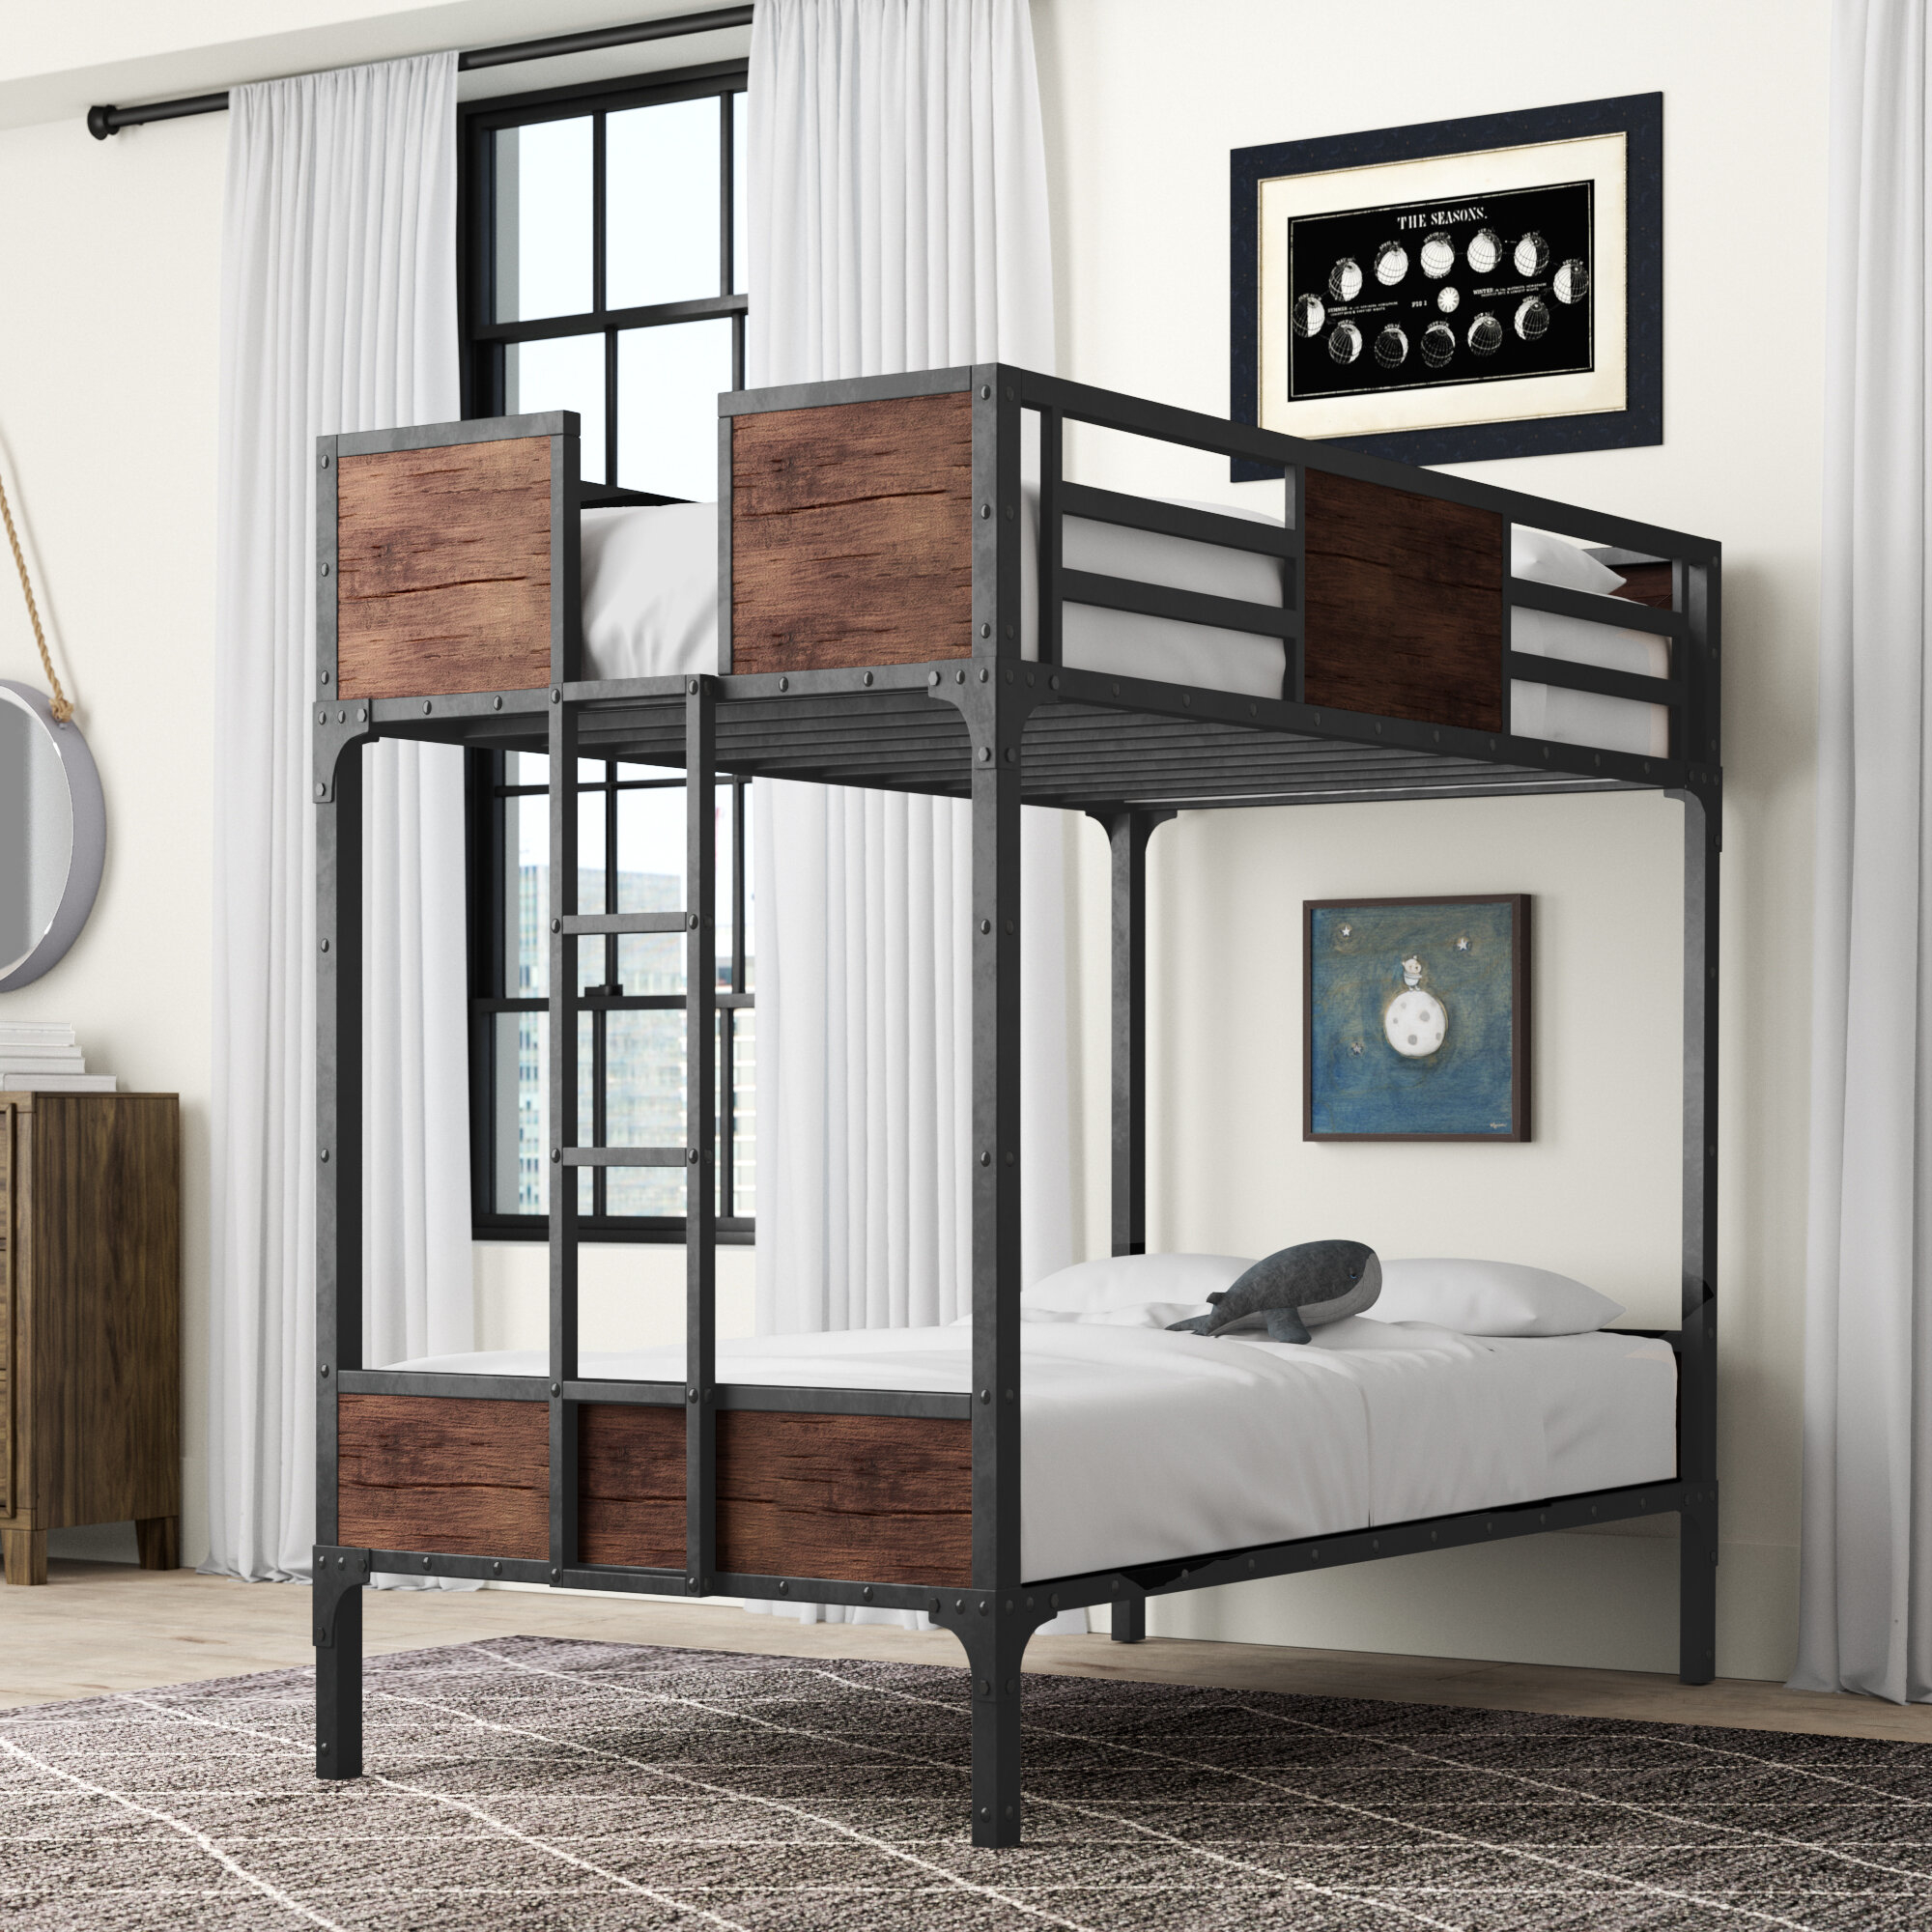 Heavy Duty Bunk Beds Visualhunt, Grown Up Bunk Beds